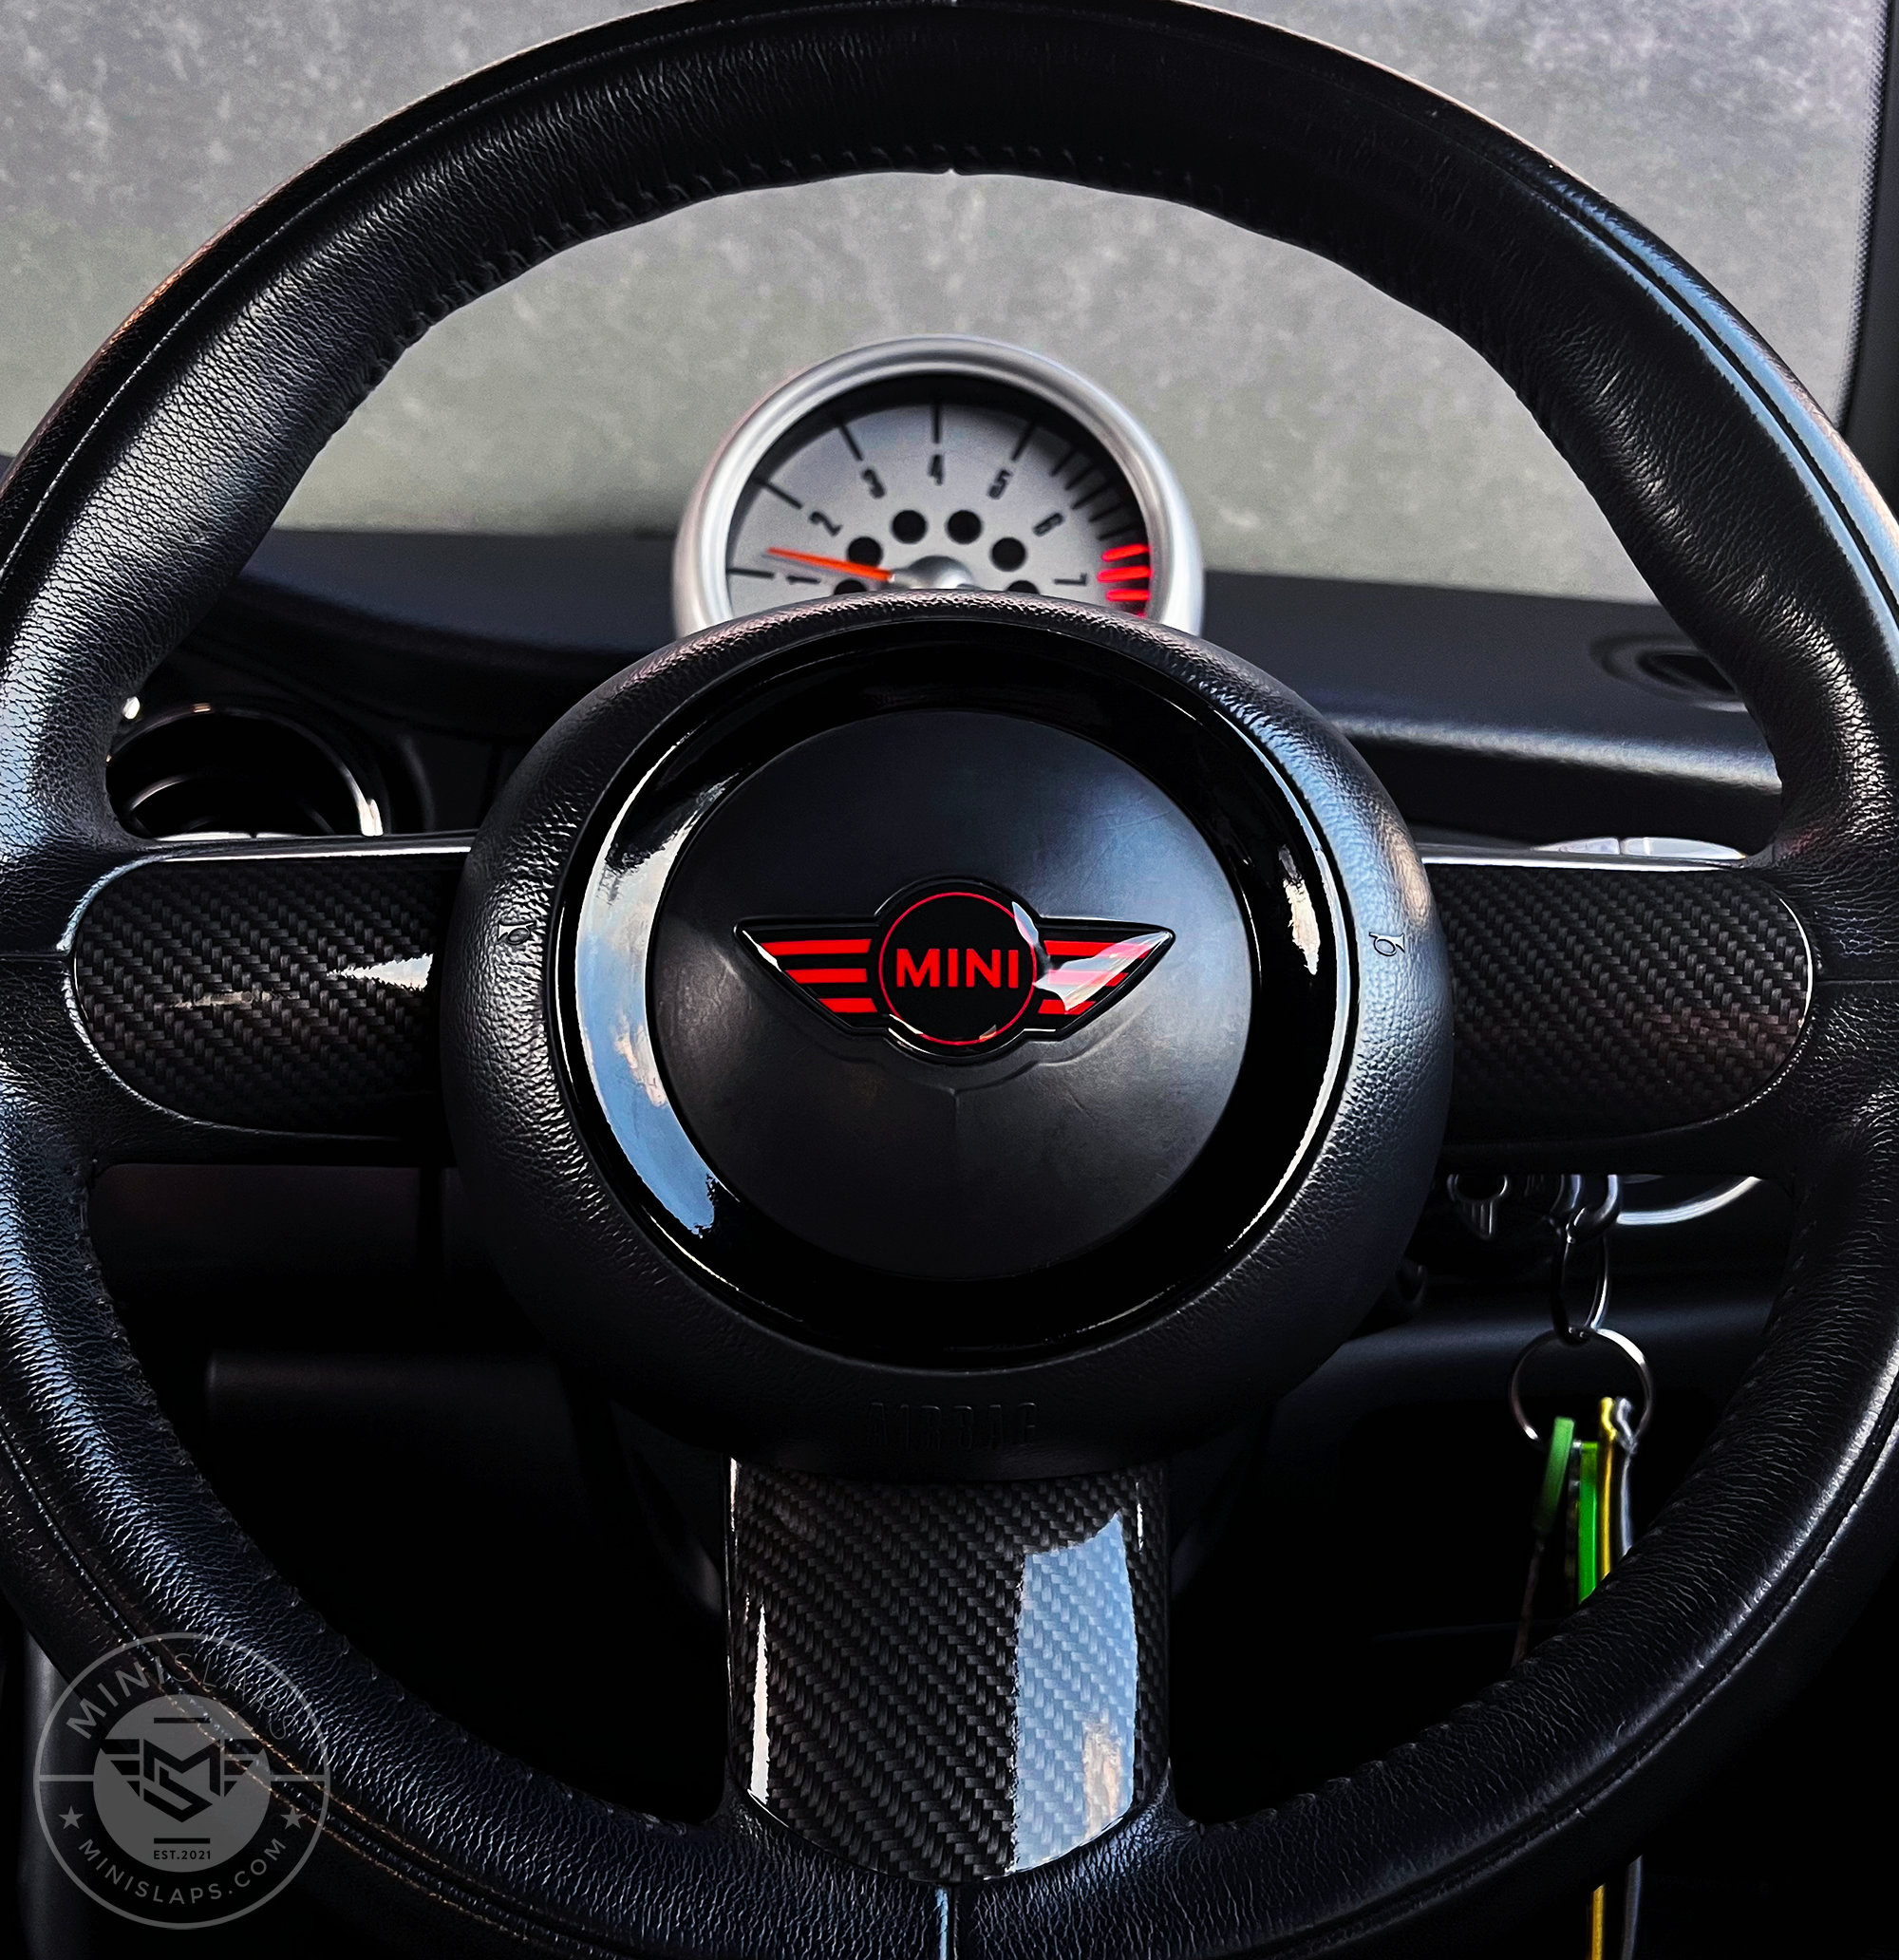 Japan Anime Auto Accessory 15inch Universal PU PVC Steering Wheel Cover  80475  China Novelty Design Car Wheel Cover Universal Car Wheel Cover   MadeinChinacom